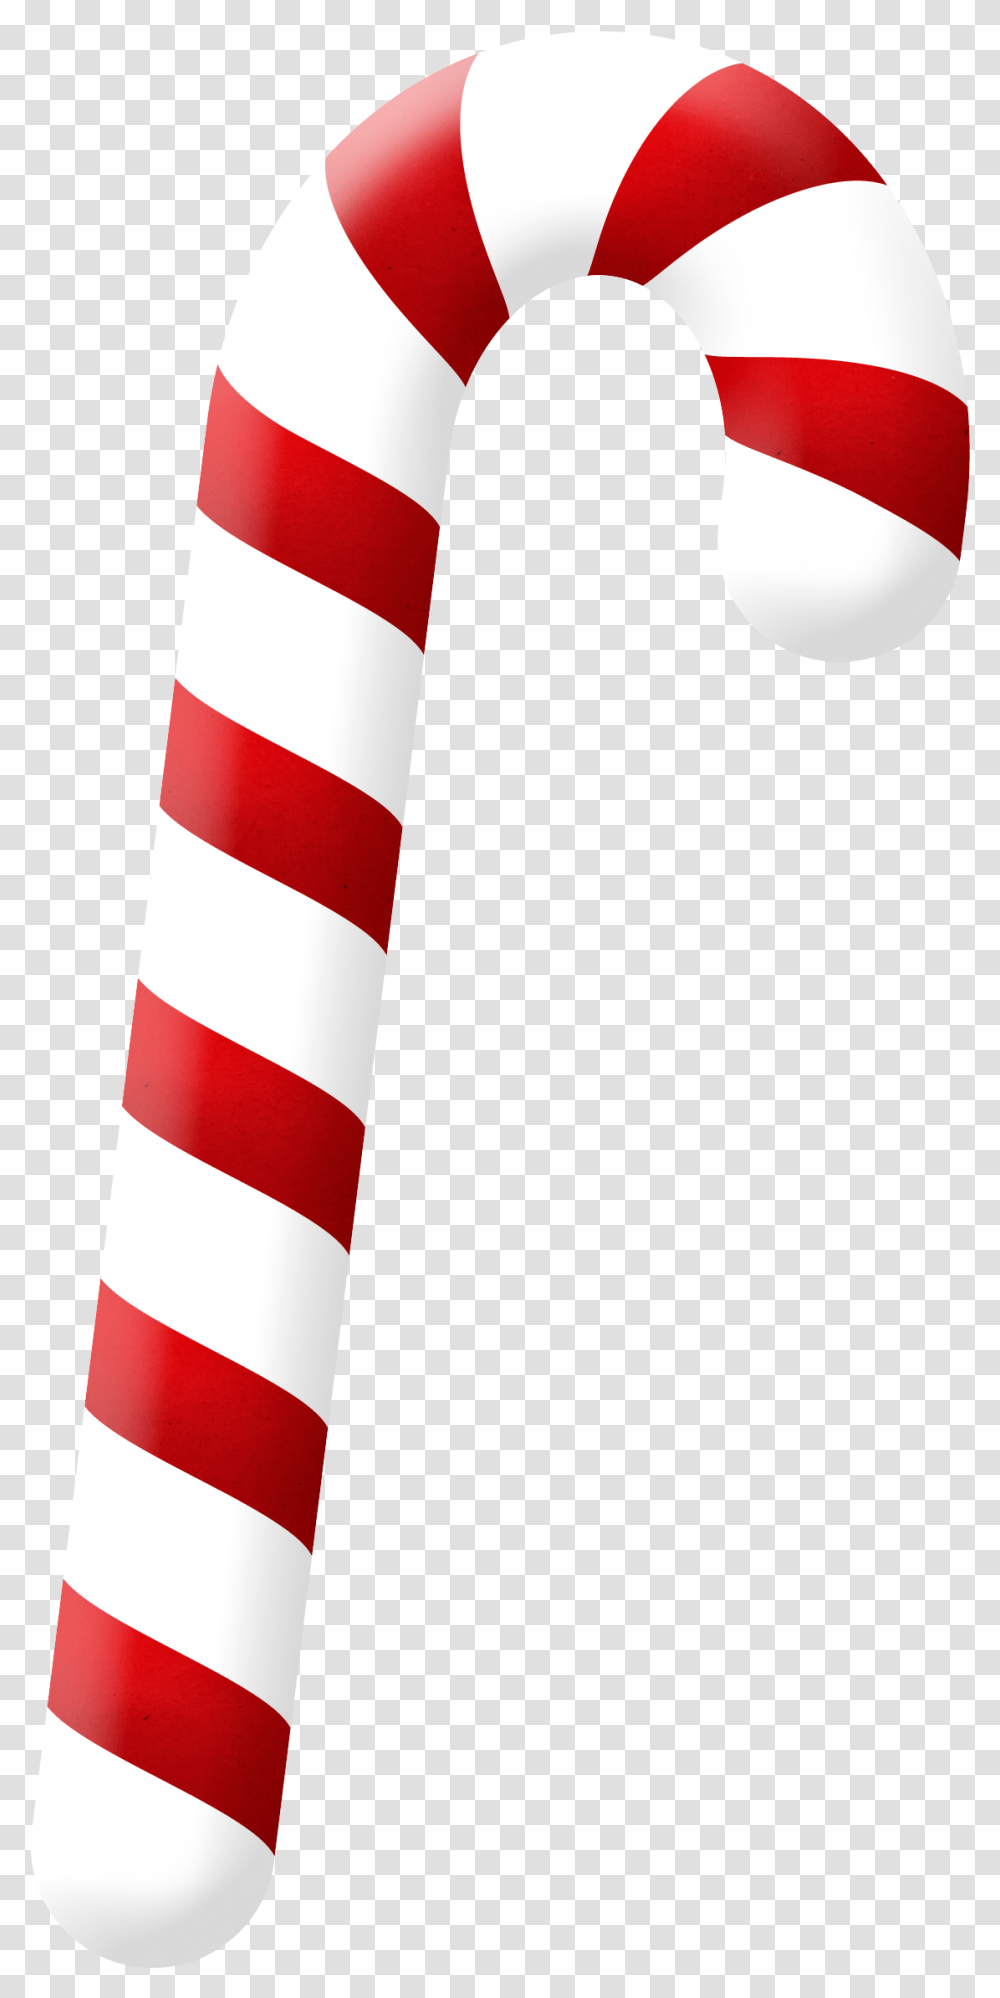 Library Of Christmas Candy Cane Black And White Files Cartoon Candy Cane, Balloon, Fence, Symbol, Barricade Transparent Png